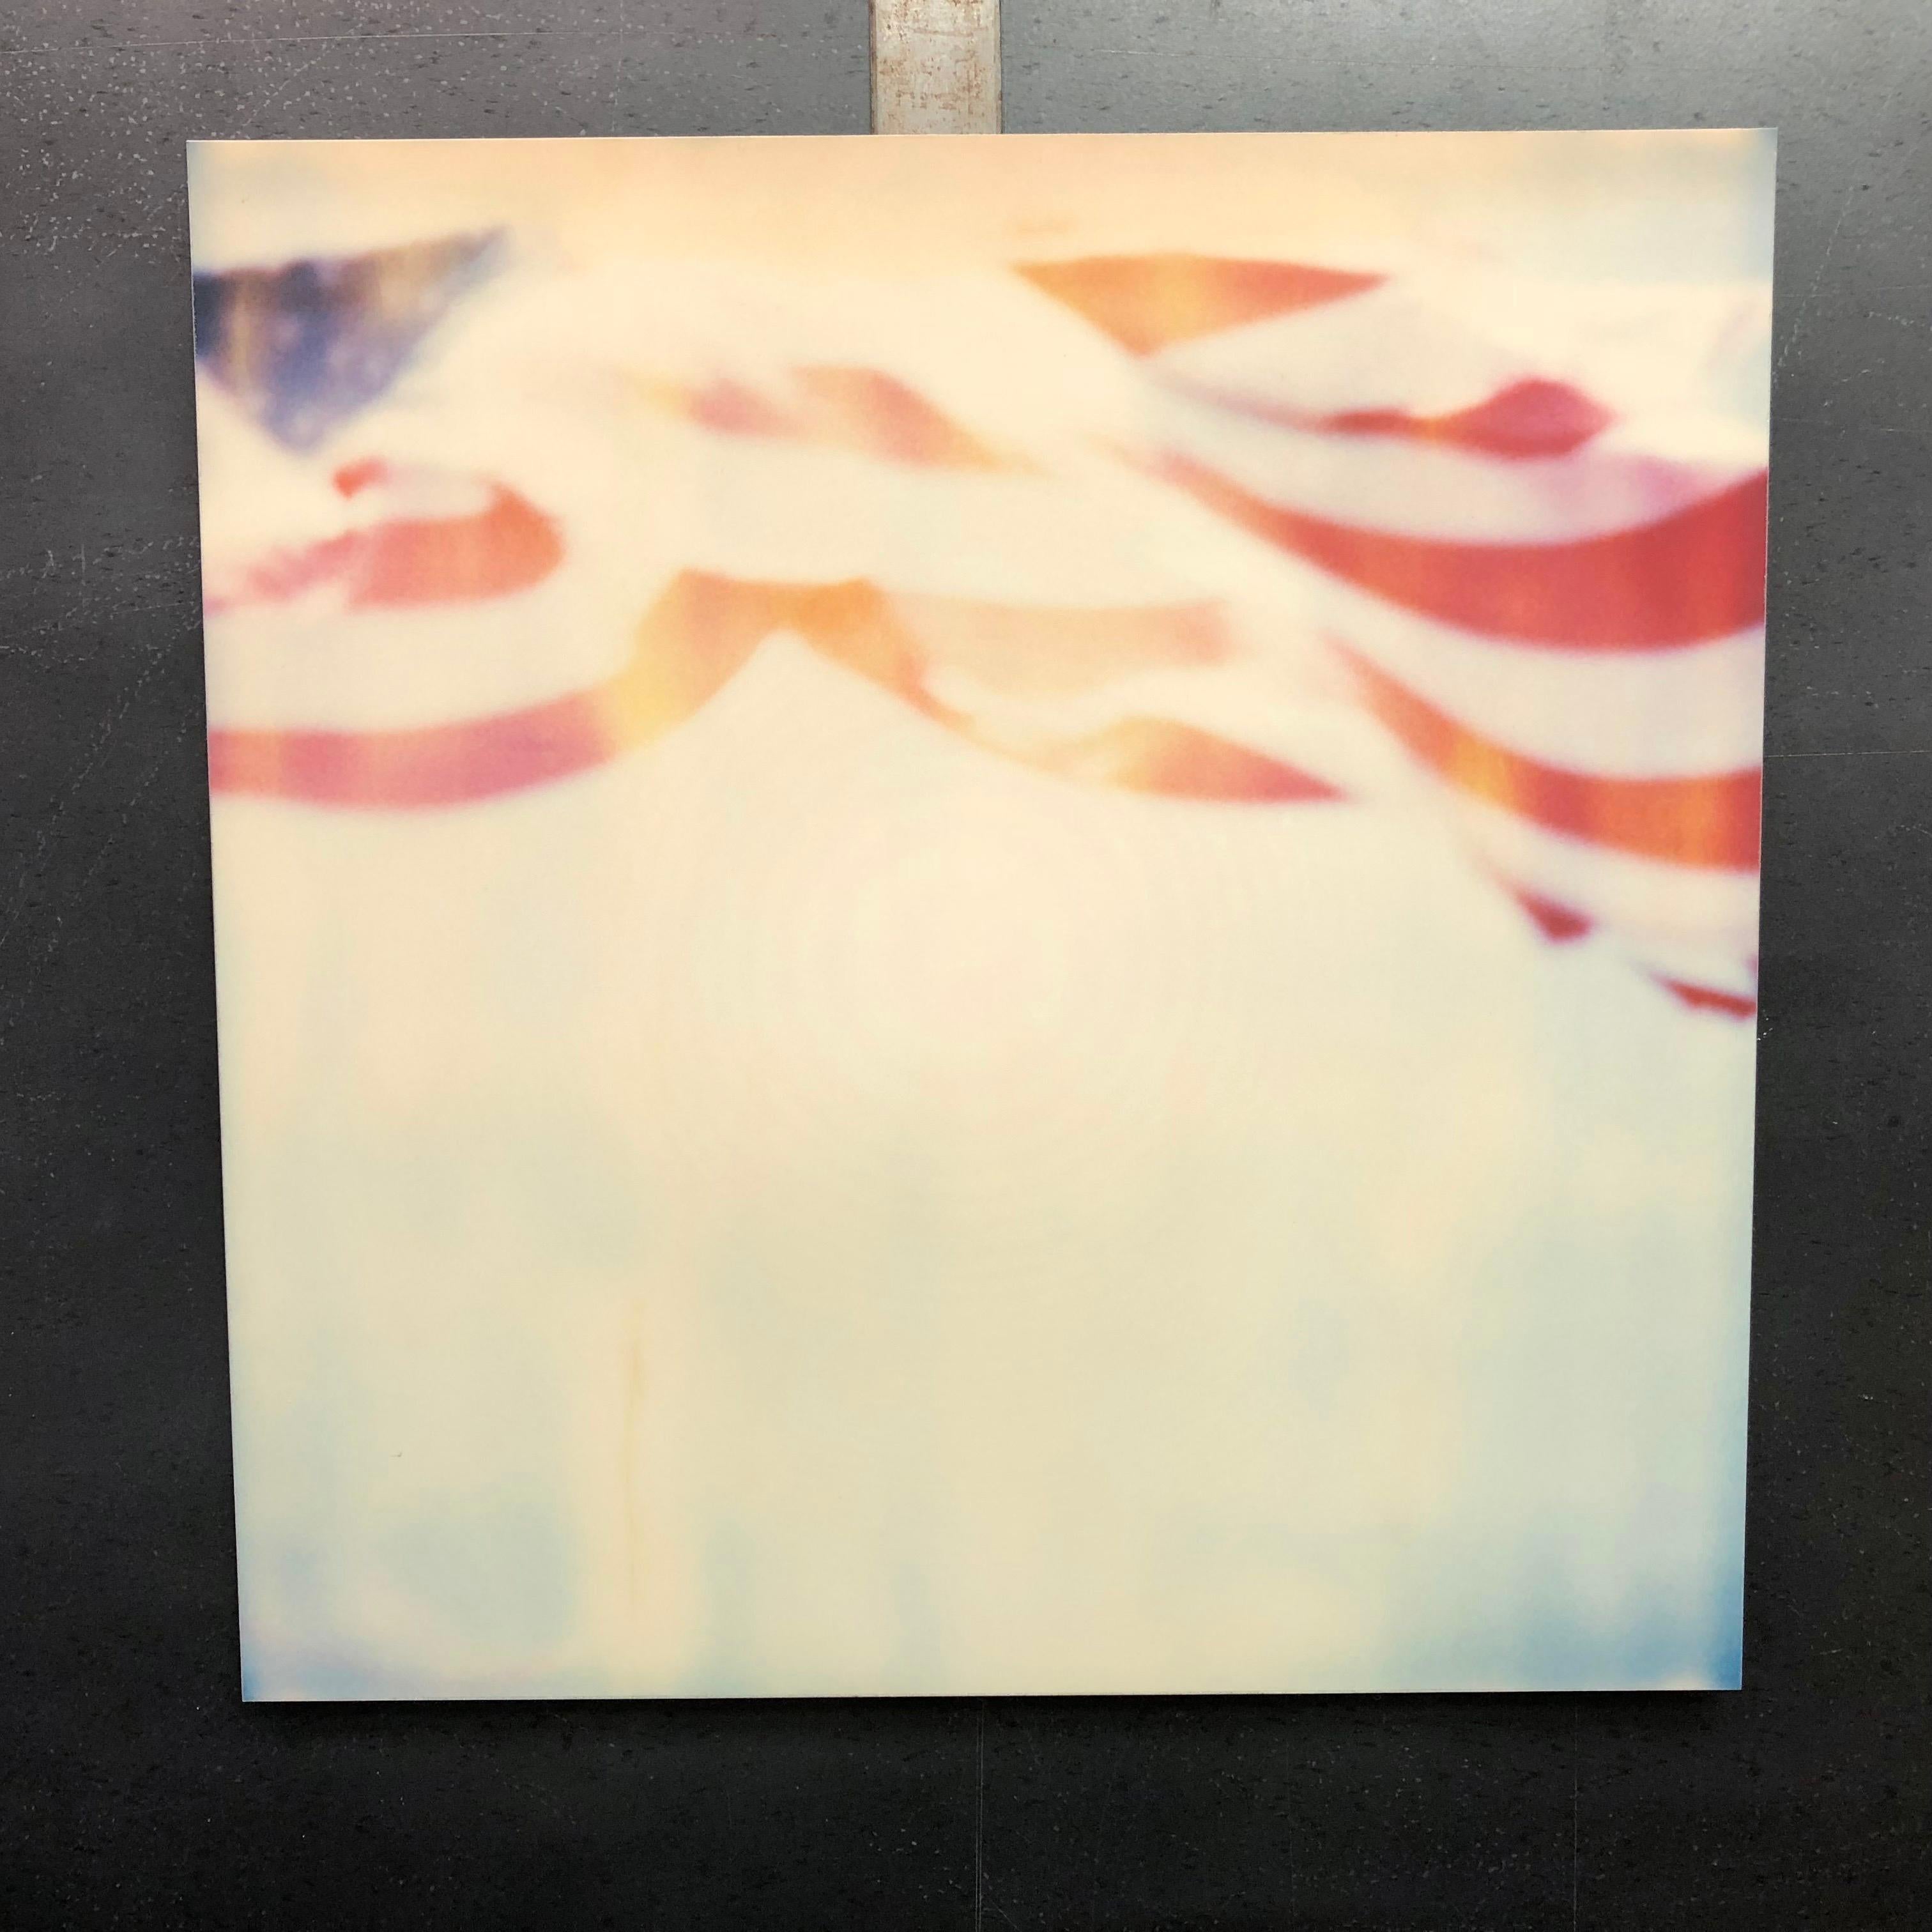 Primary Colors - Contemporary, Abstract, Landscape, USA, Polaroid, Flag 2